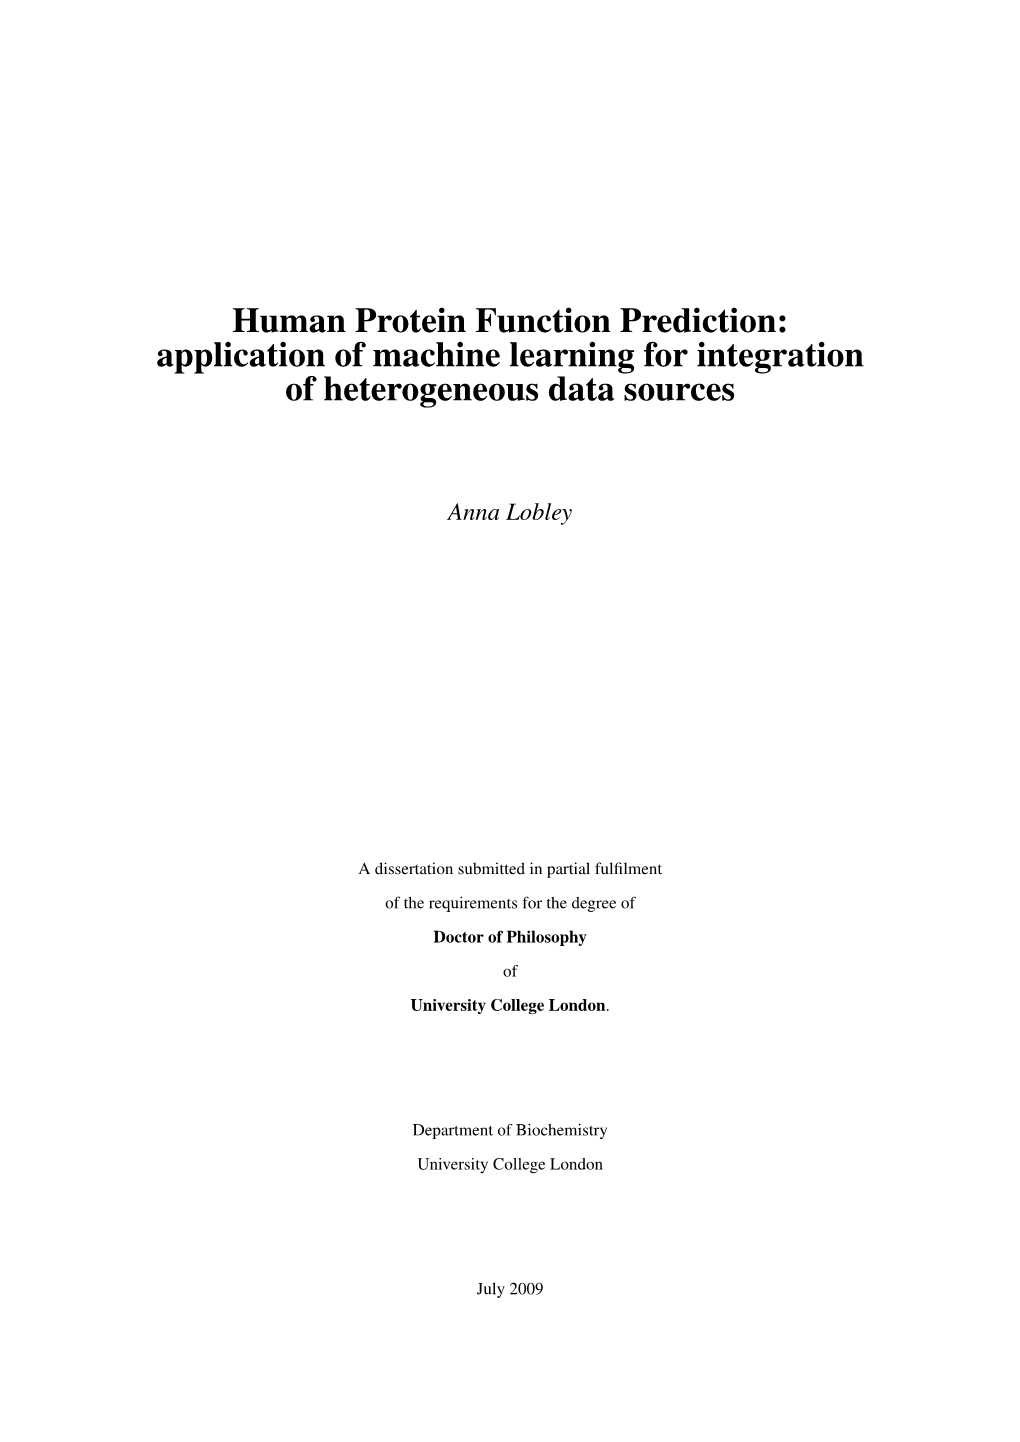 Human Protein Function Prediction: Application of Machine Learning for Integration of Heterogeneous Data Sources